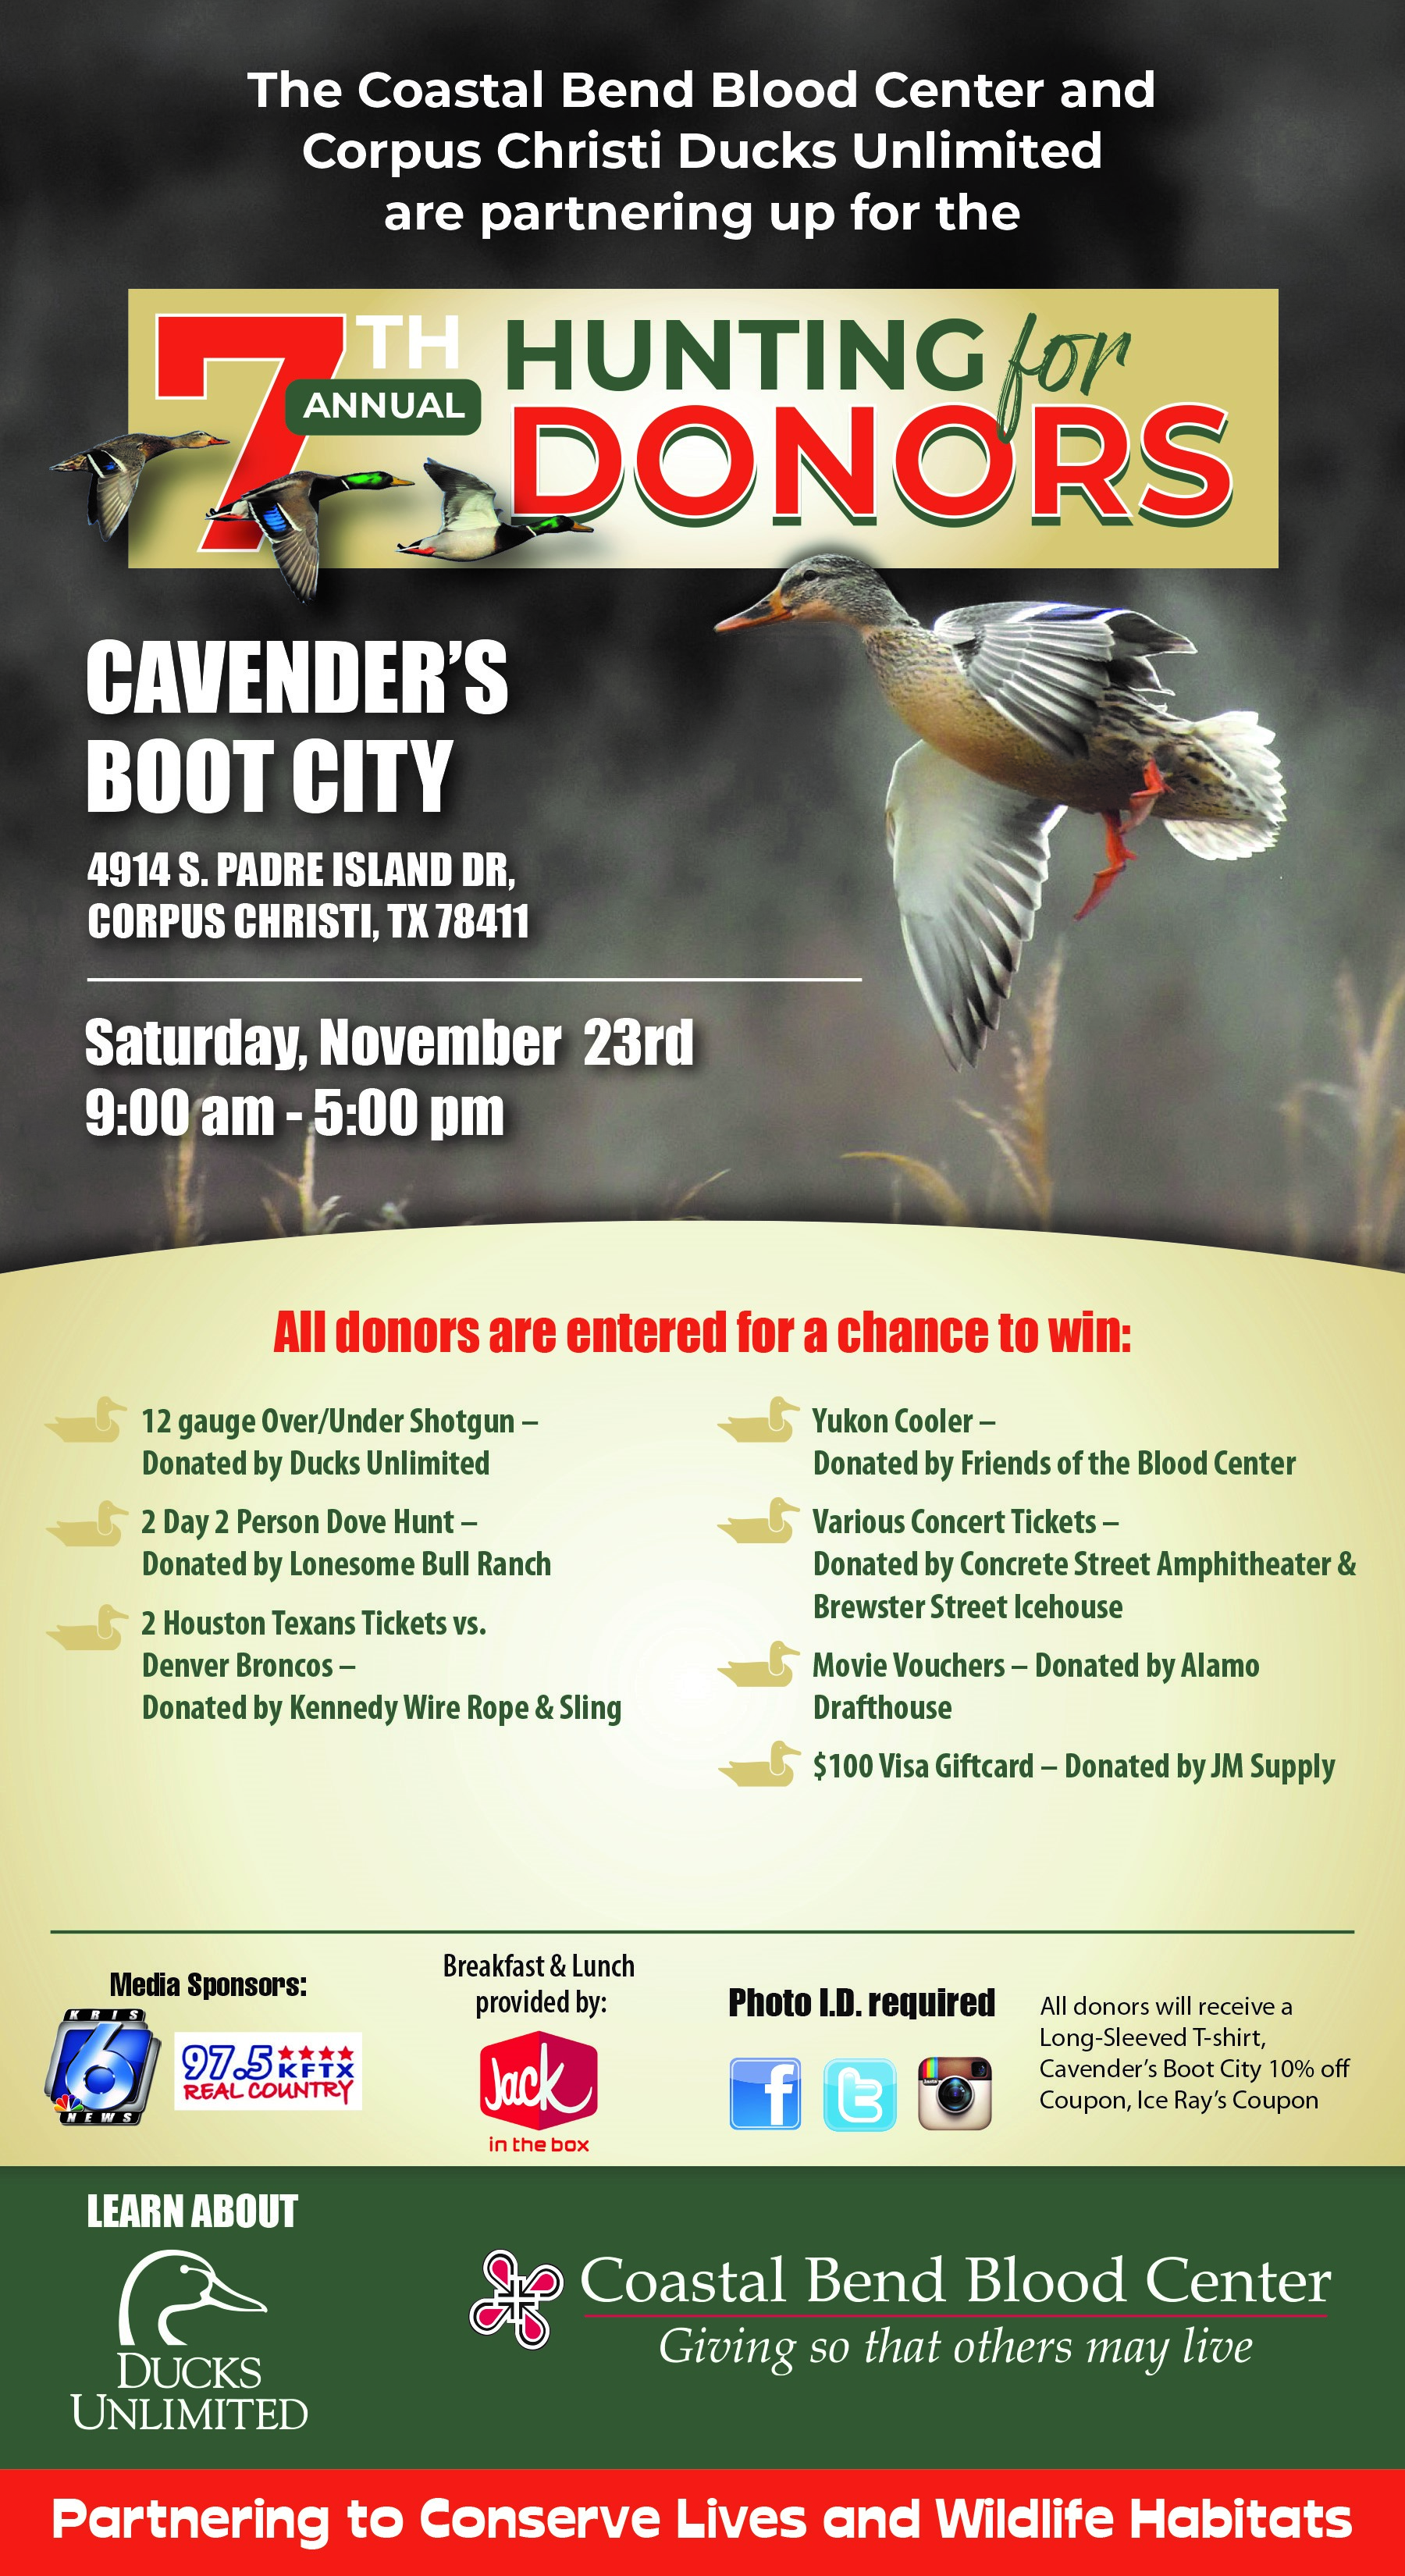 cavender's boot city coupons